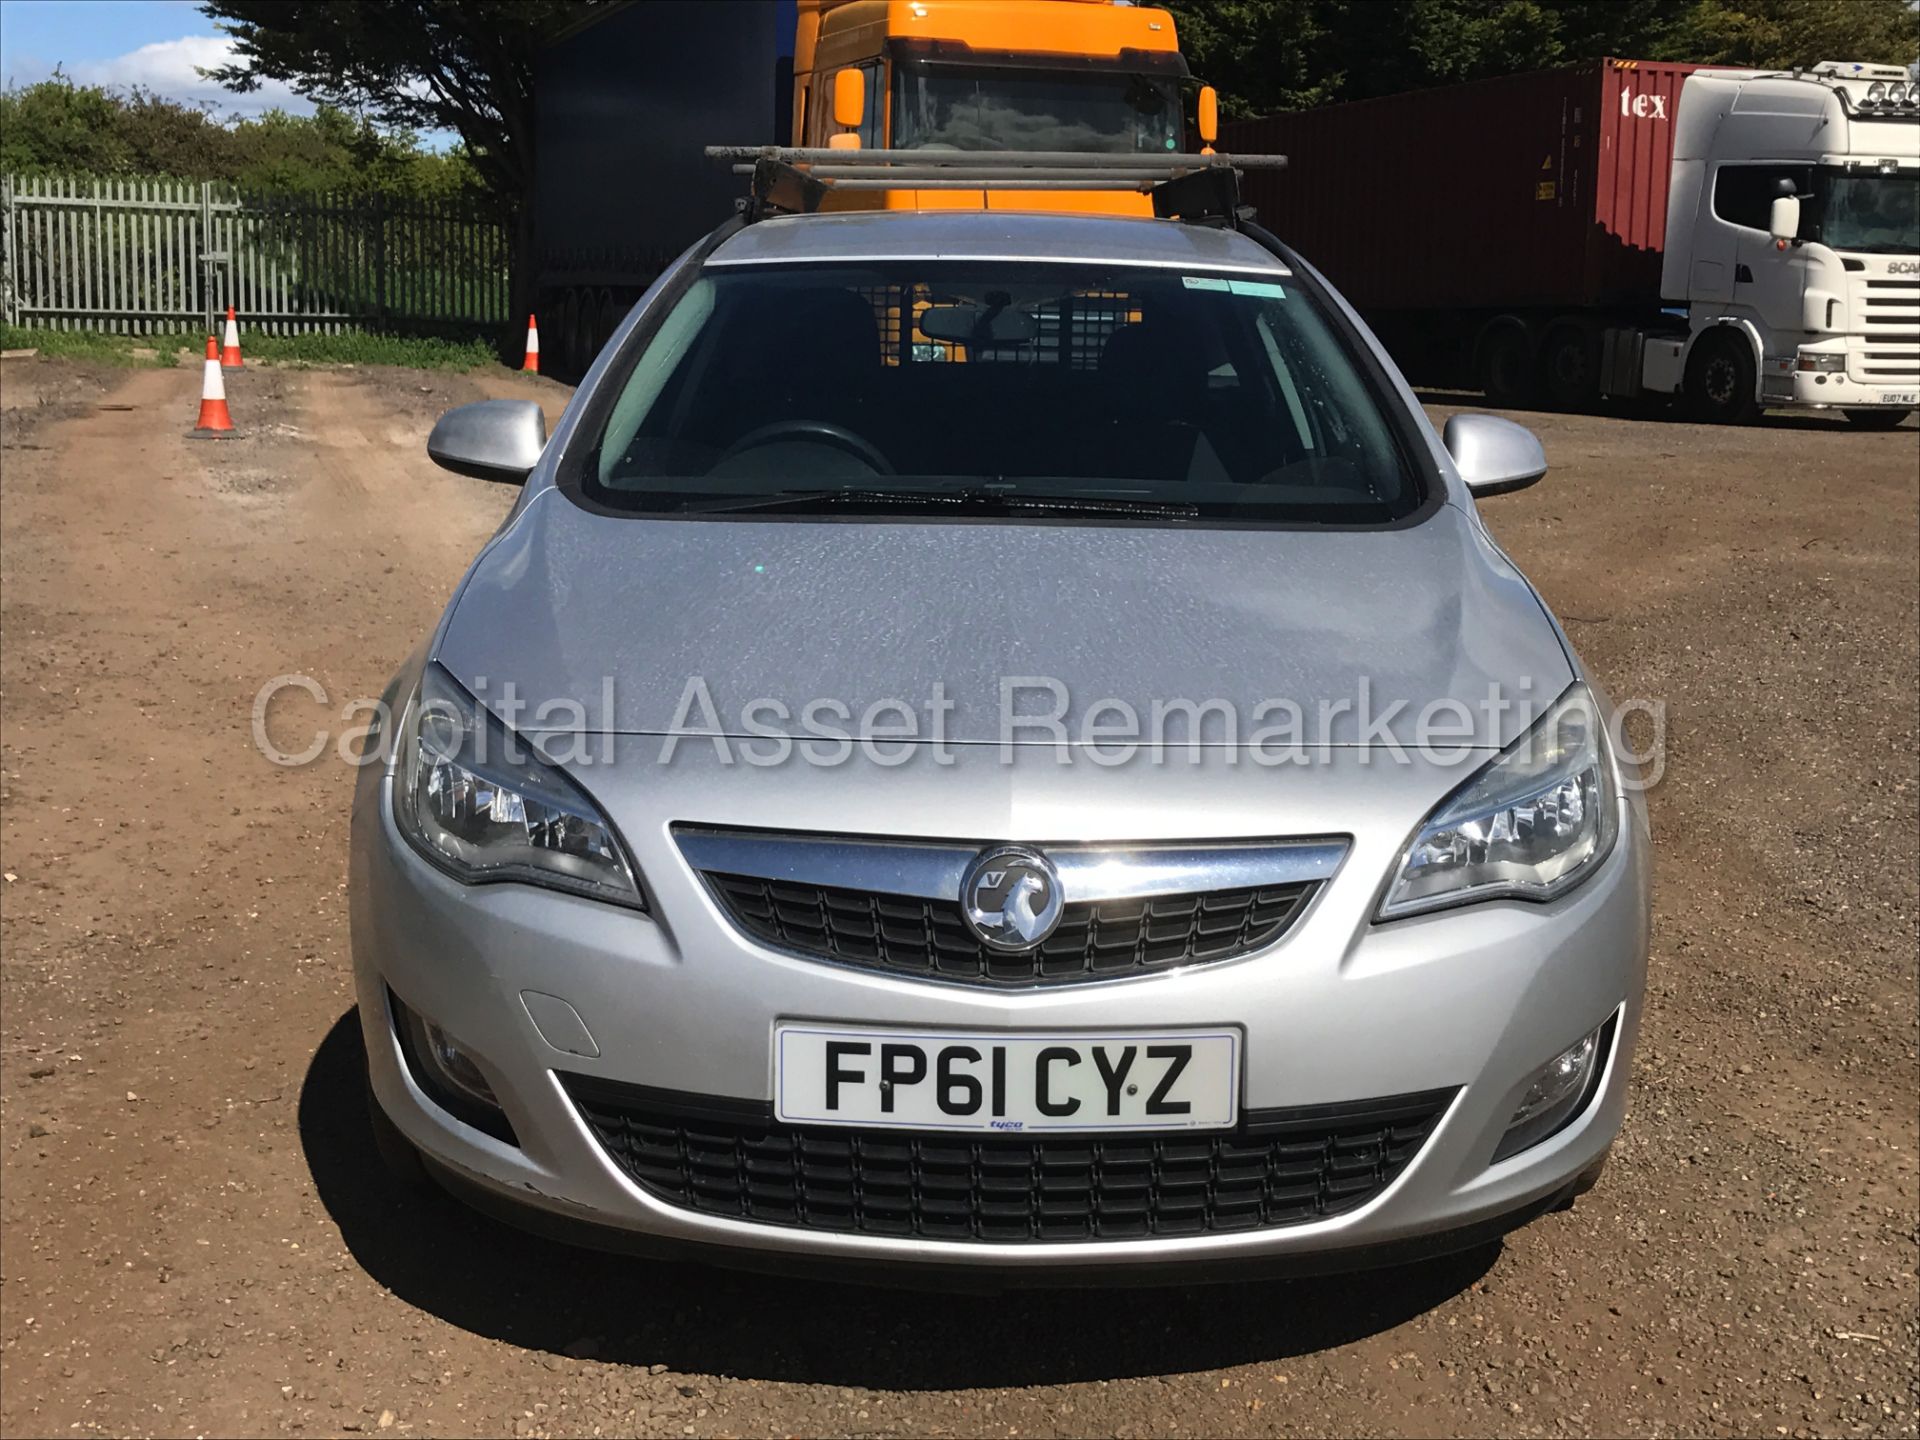 VAUXHALL ASTRA 'EXCLUSIVE' (2012 MODEL) '1.7 CDTI - ECOFLEX - 6 SPEED' **AIR CON** (1 OWNER) - Image 9 of 25